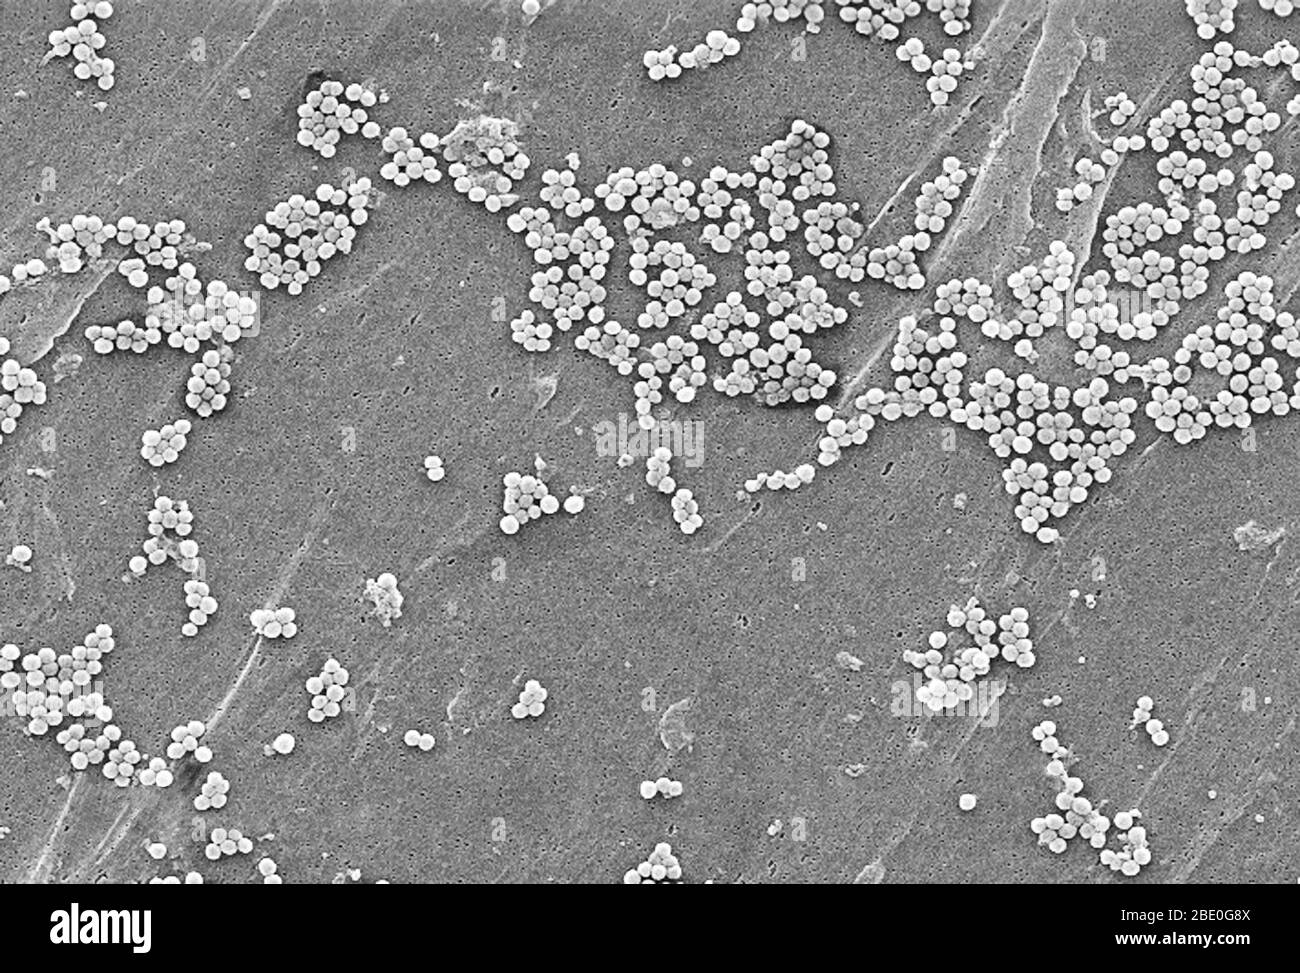 This scanning electron micrograph depicts a grouping of methicillin resistant Staphylococcus aureus (MRSA) bacteria. They are from one of the first isolates in the U.S. that showed increased resistance to vancomycin as well. Note the increase in cell wall material seen as clumps on the organism's surface. Recently recognized outbreaks or clusters of MRSA in community settings have been associated with strains that have some unique microbiologic and genetic properties compared to the traditional hospital-based MRSA strains. This suggests that some biologic properties, e.g., virulence factors li Stock Photo